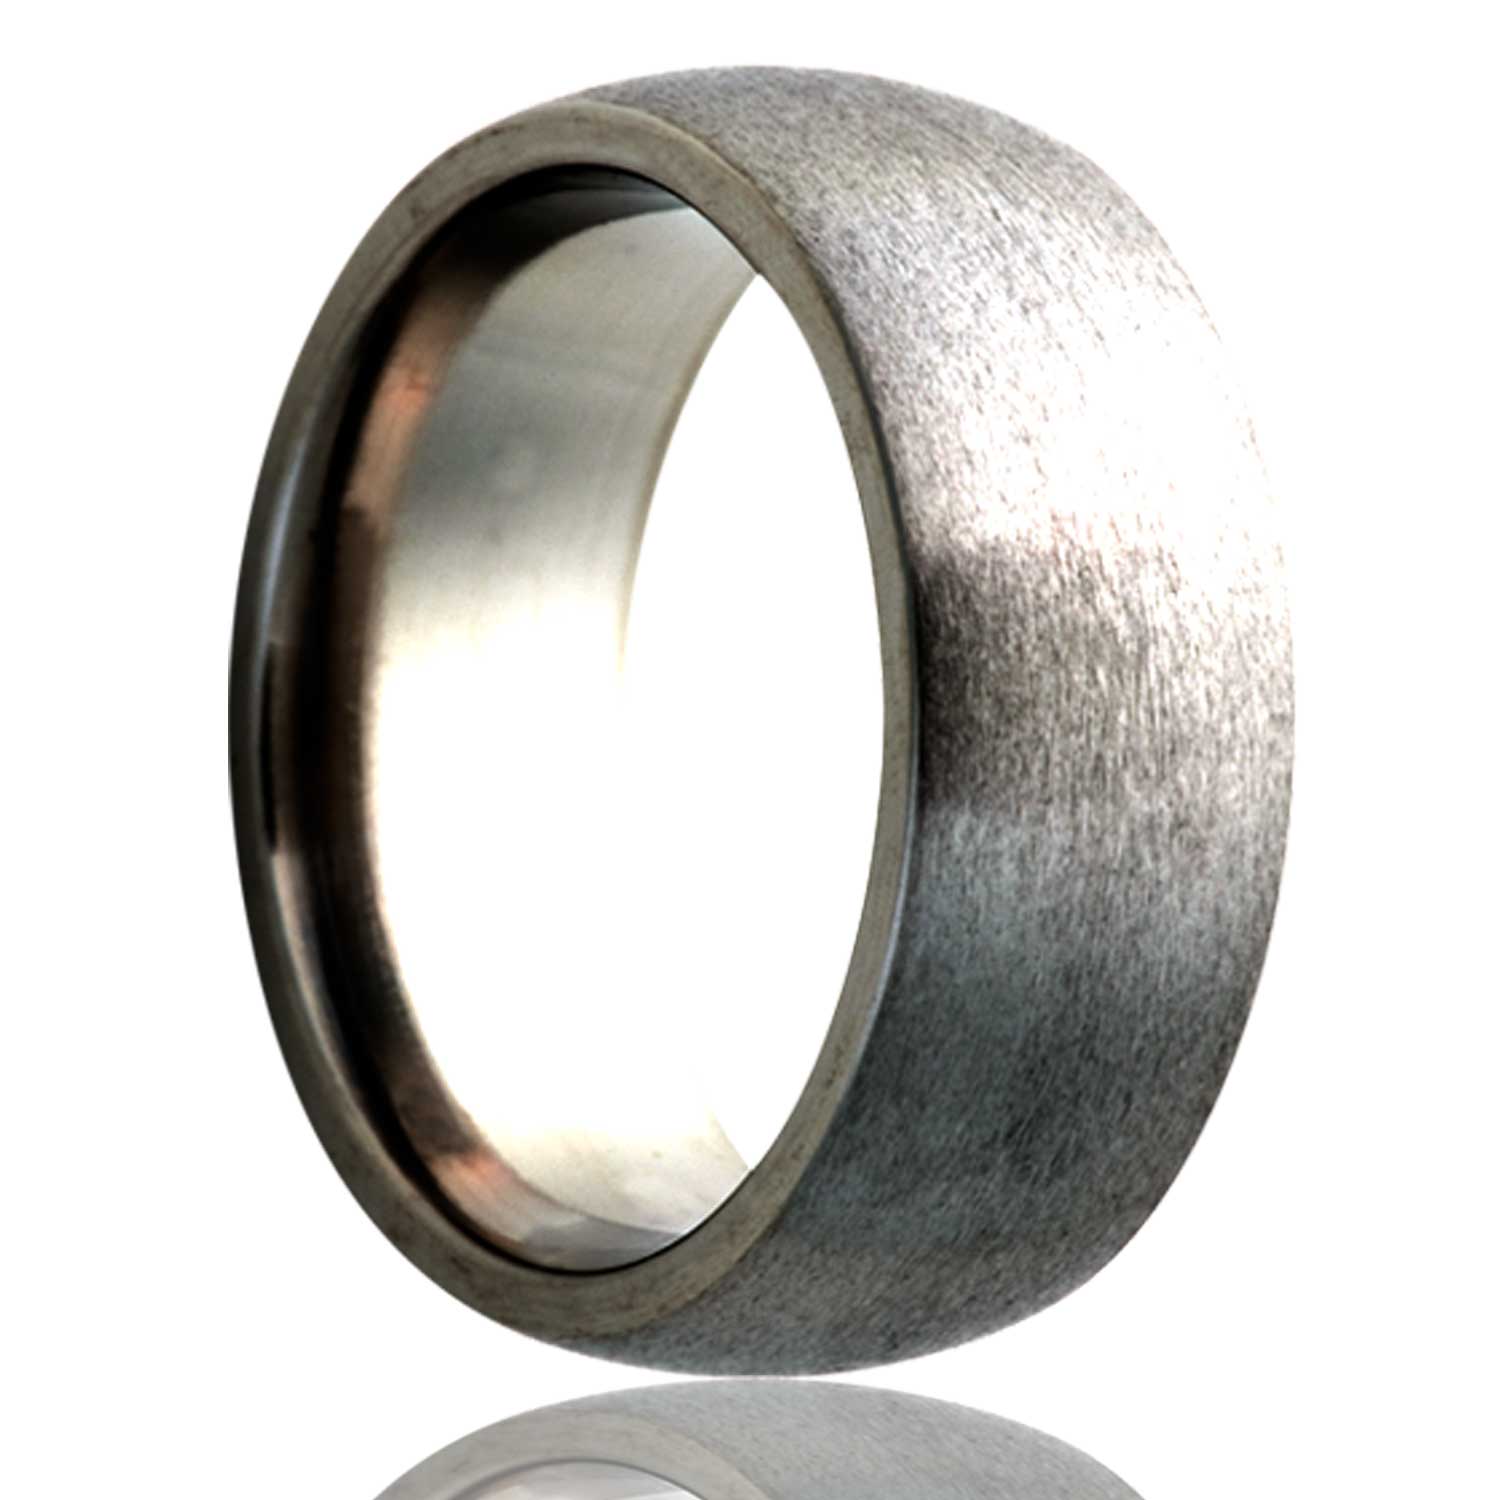 A domed satin finish titanium wedding band displayed on a neutral white background.